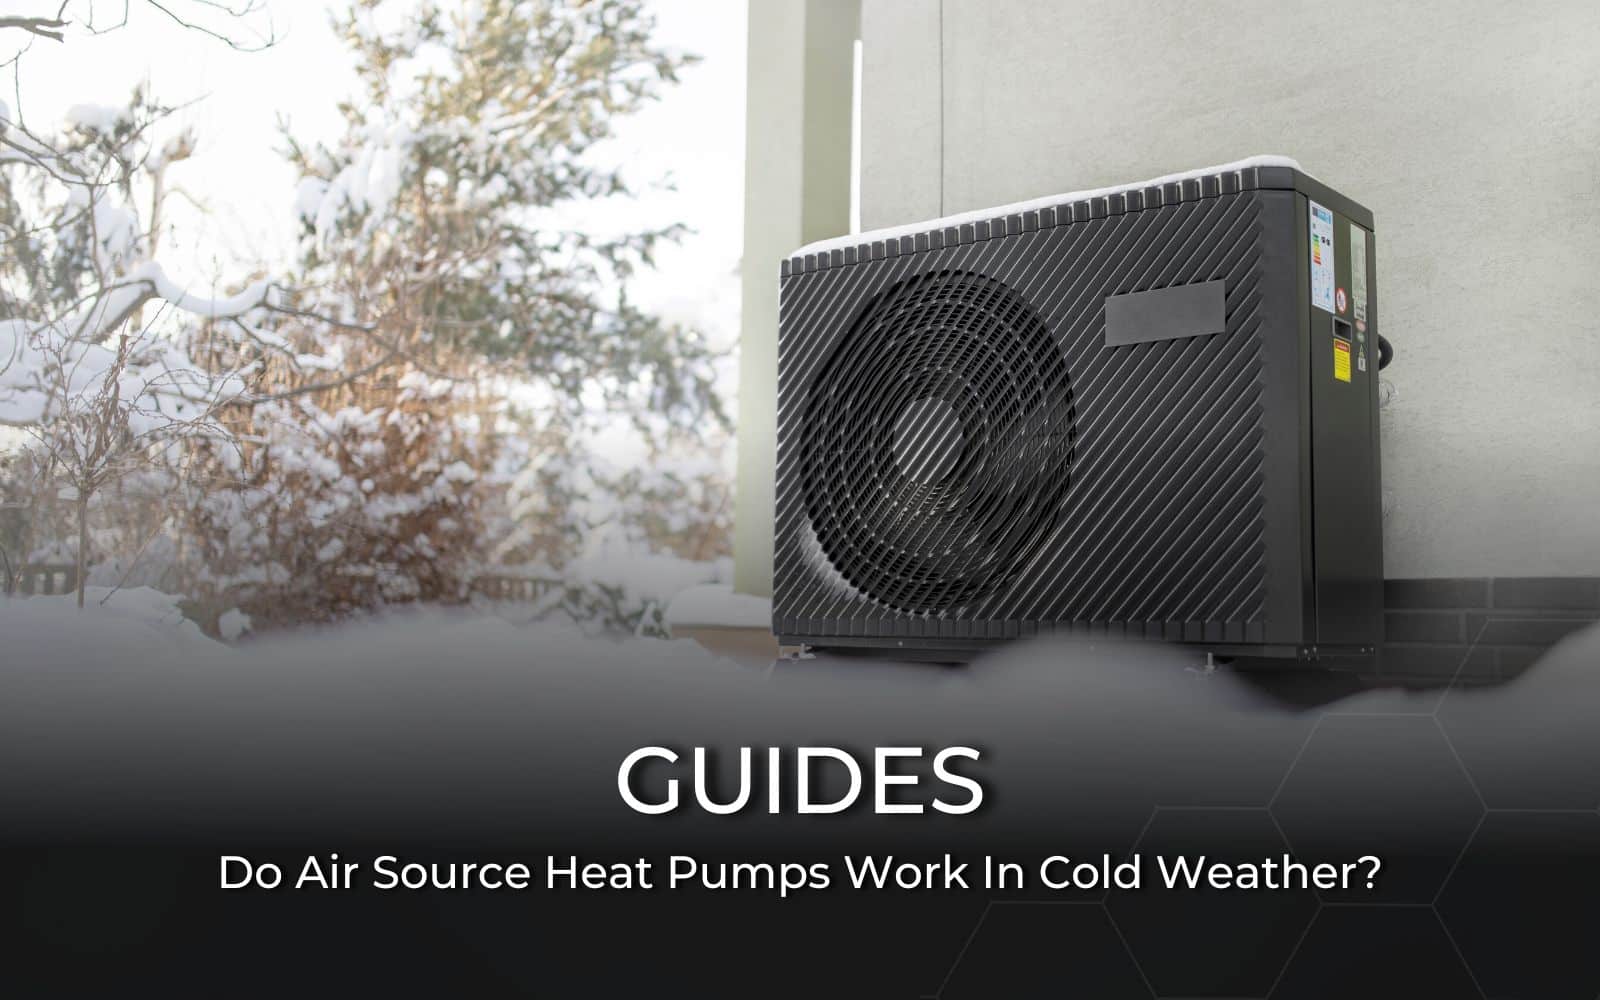 Do Air Source Heat Pumps work in cold weather?